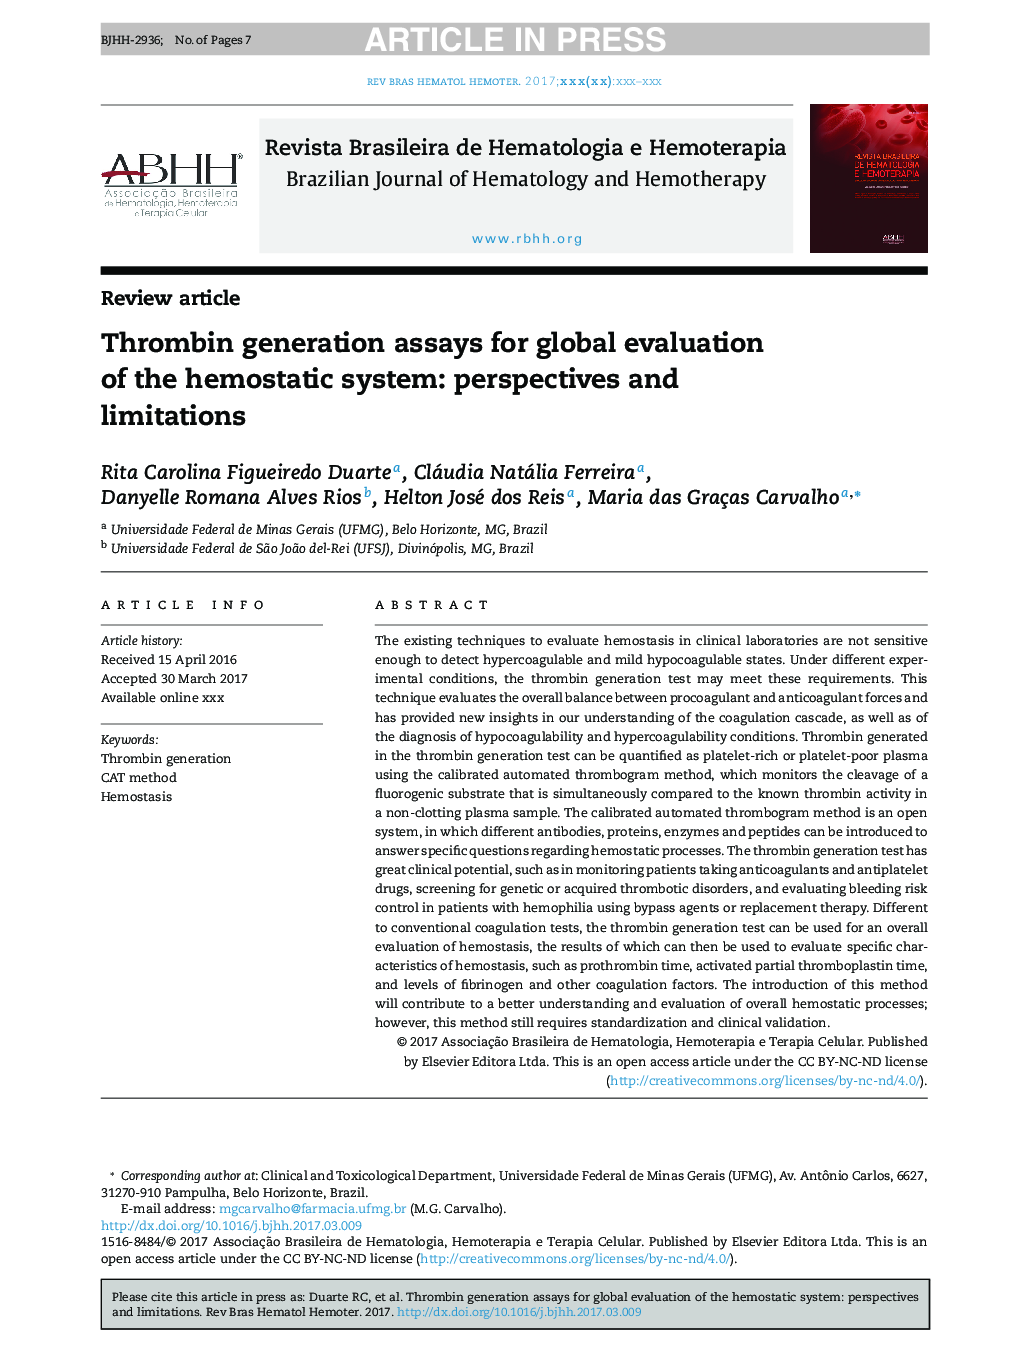 Thrombin generation assays for global evaluation of the hemostatic system: perspectives and limitations